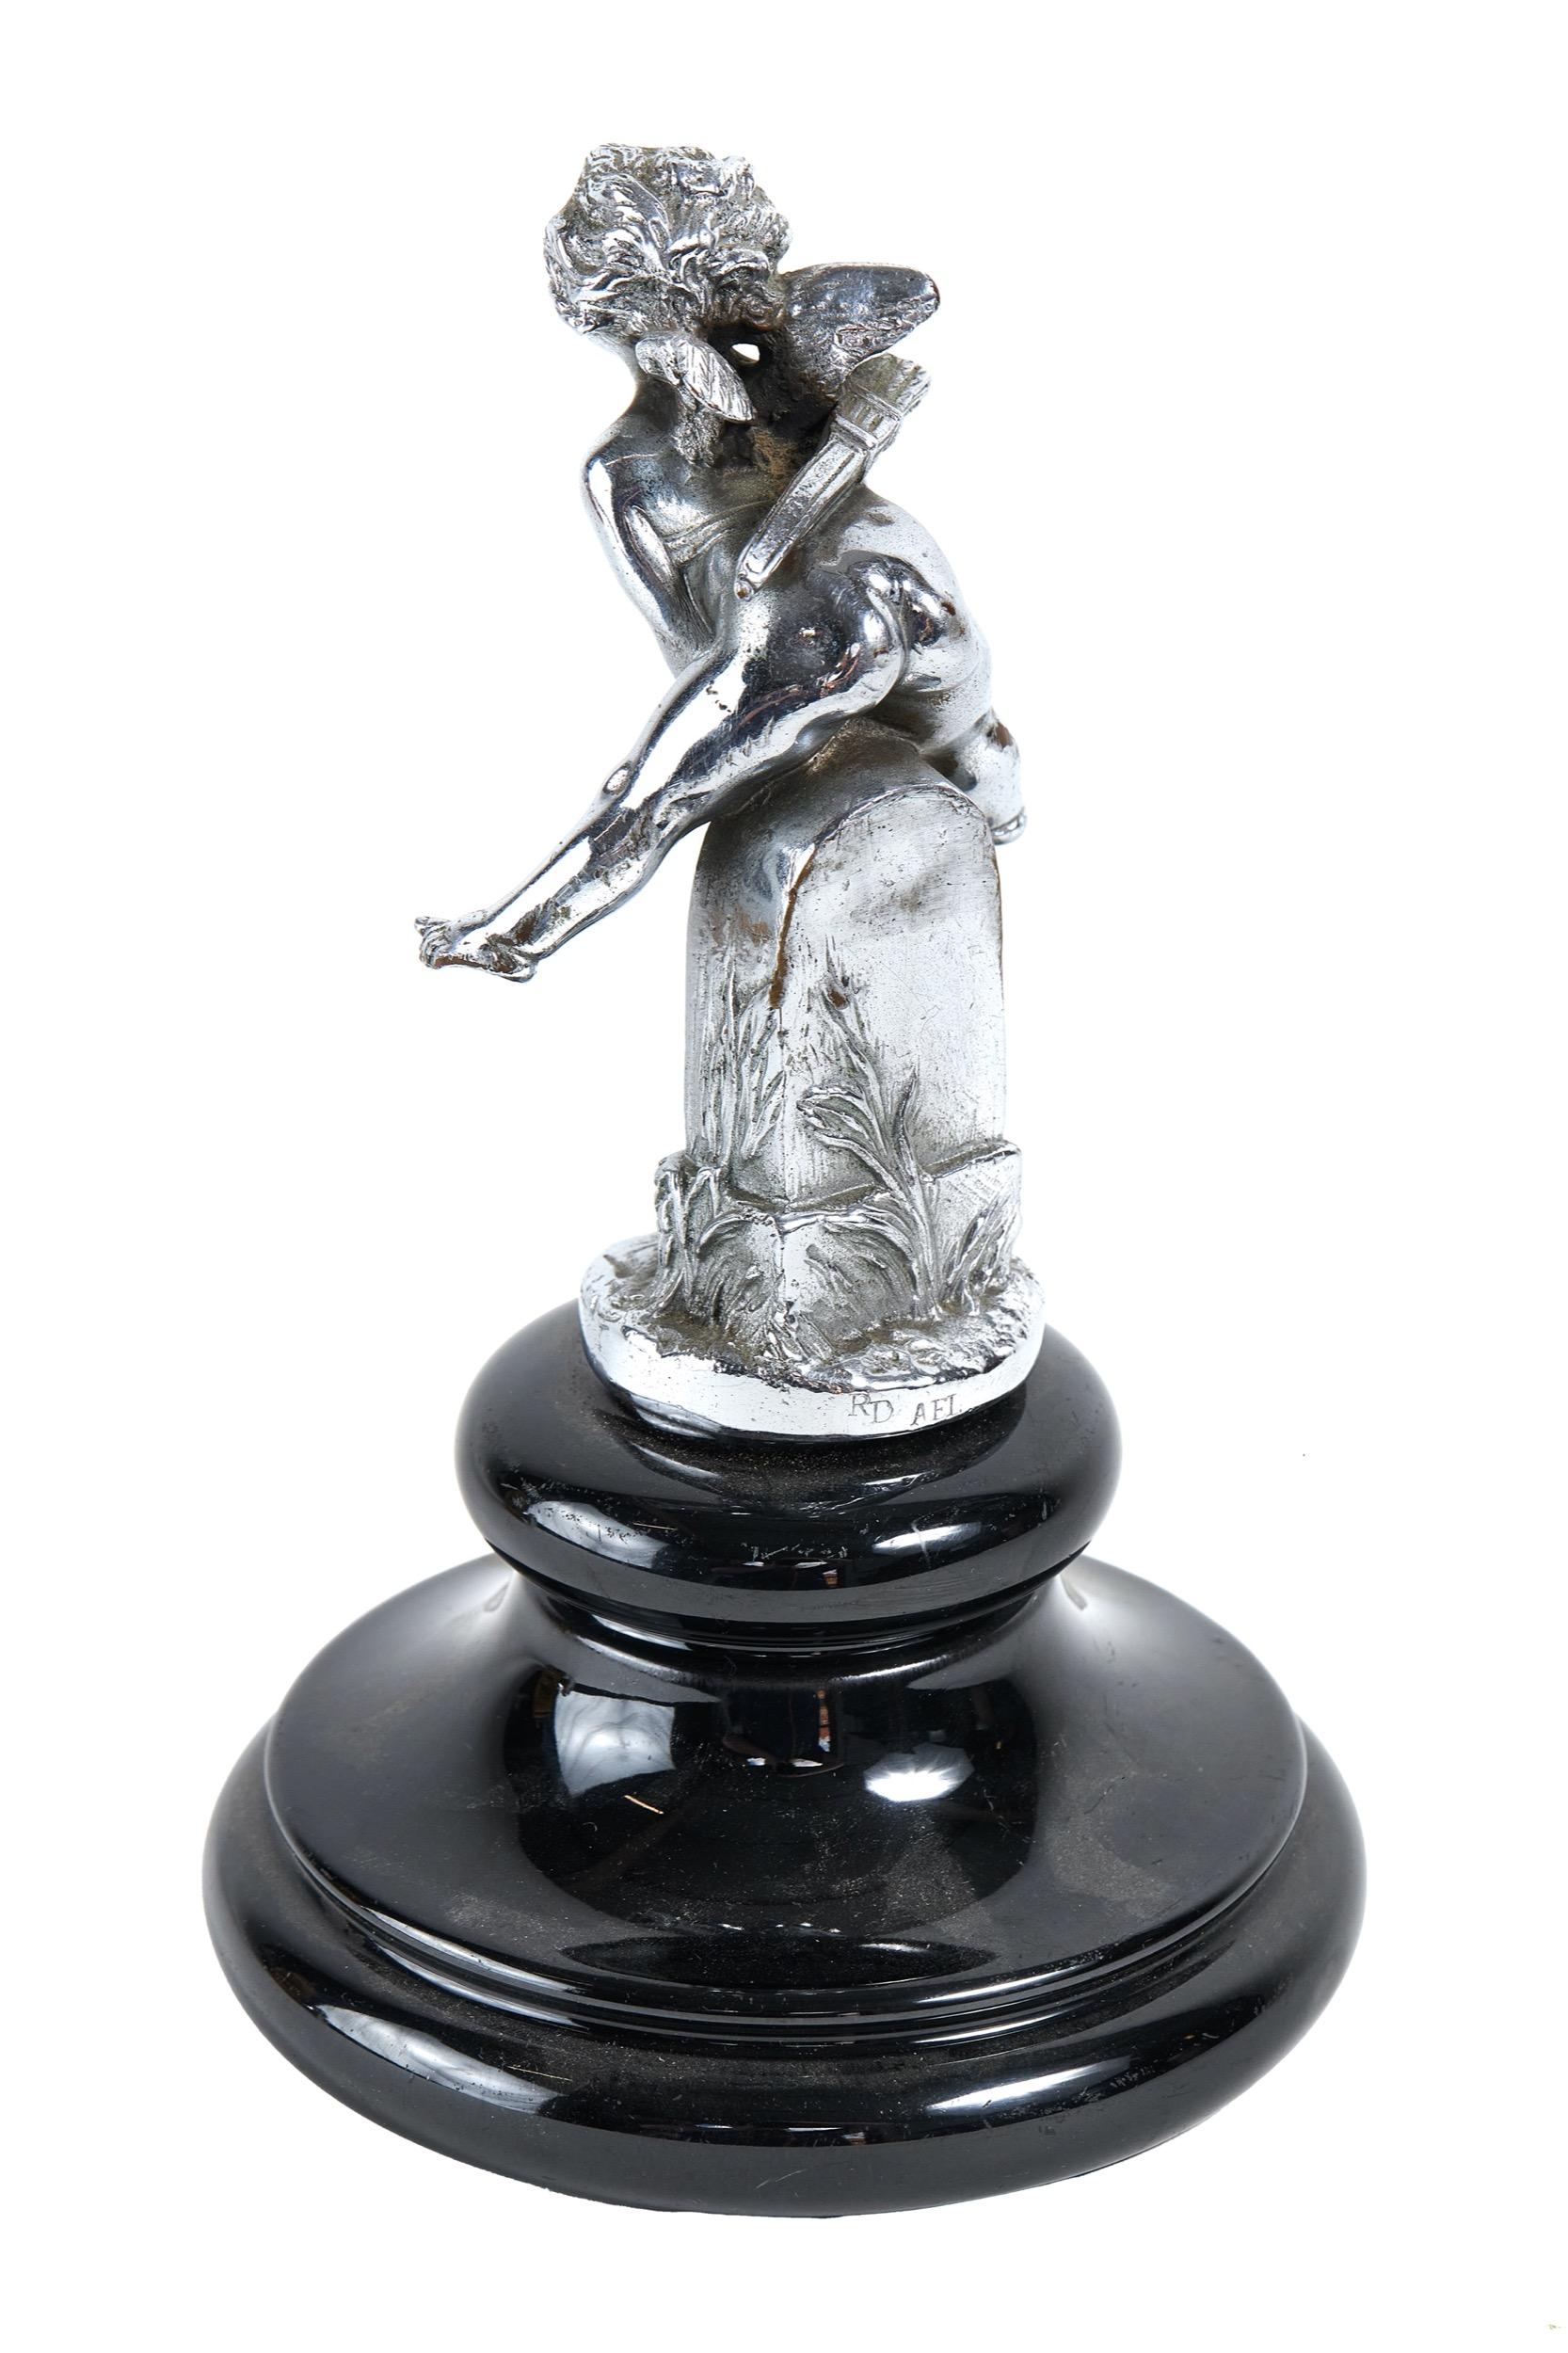 Vintage Chrome Plated Car mascot 
in the form of Cupid vaulting road marker CYTHERE 22KM , 
chrome plated on brass ,
 signed A.RENEVEY RD AEL
circa 1930, original car mascot.
[there has been a hole drilled in base of mascot]
Dimensions H 14.5cm x W